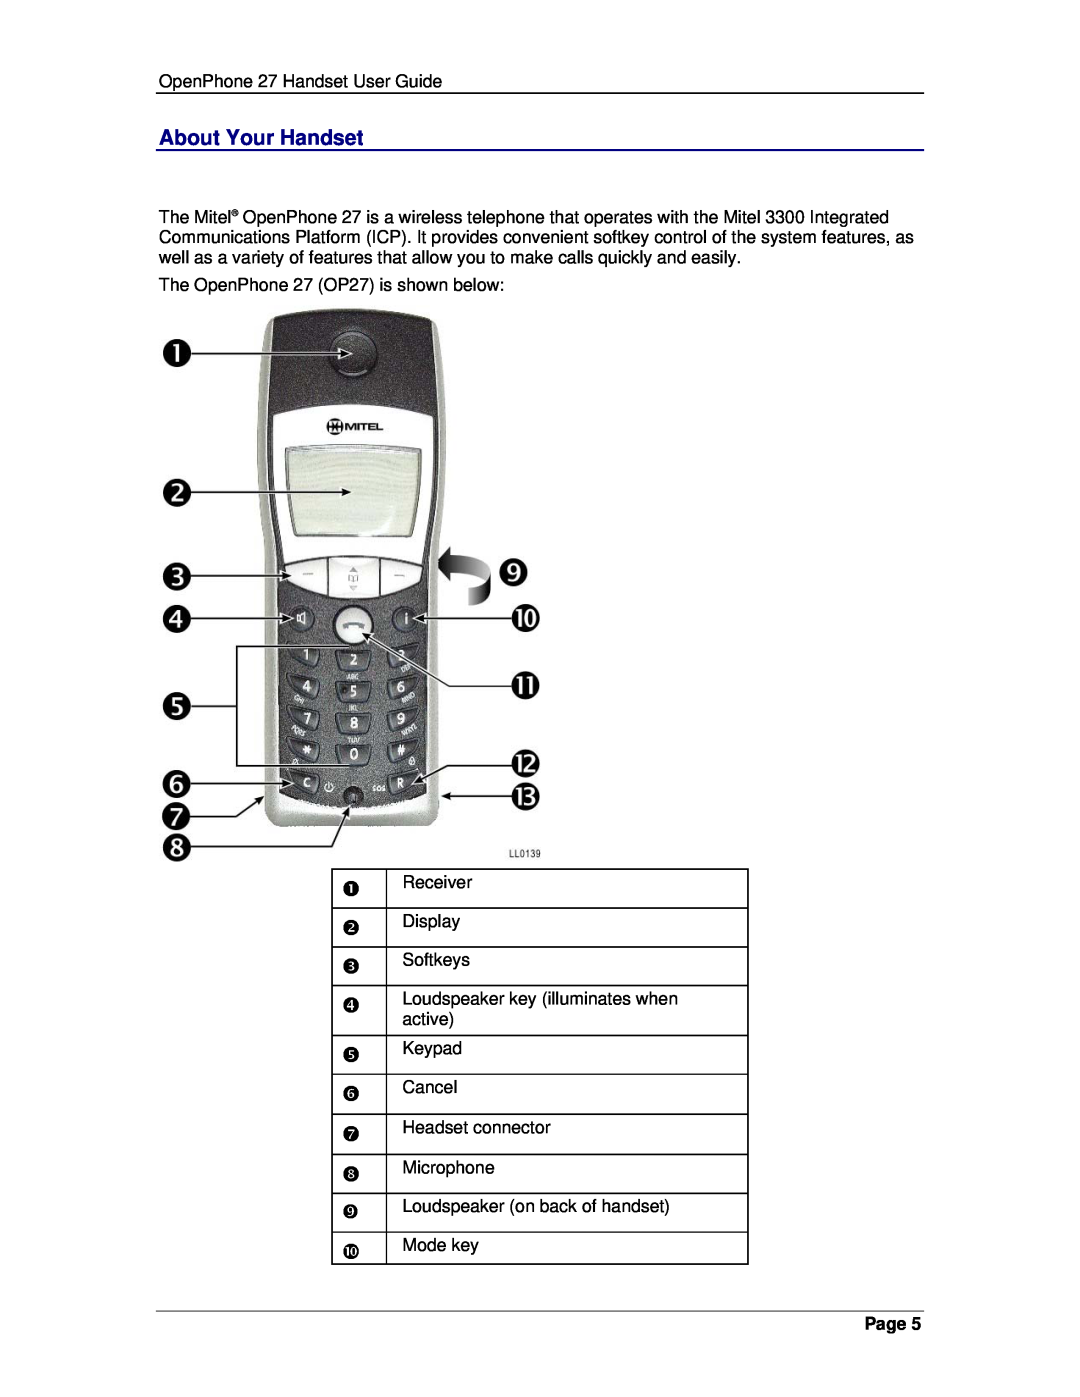 Mitel 3300 manual About Your Handset, Page 